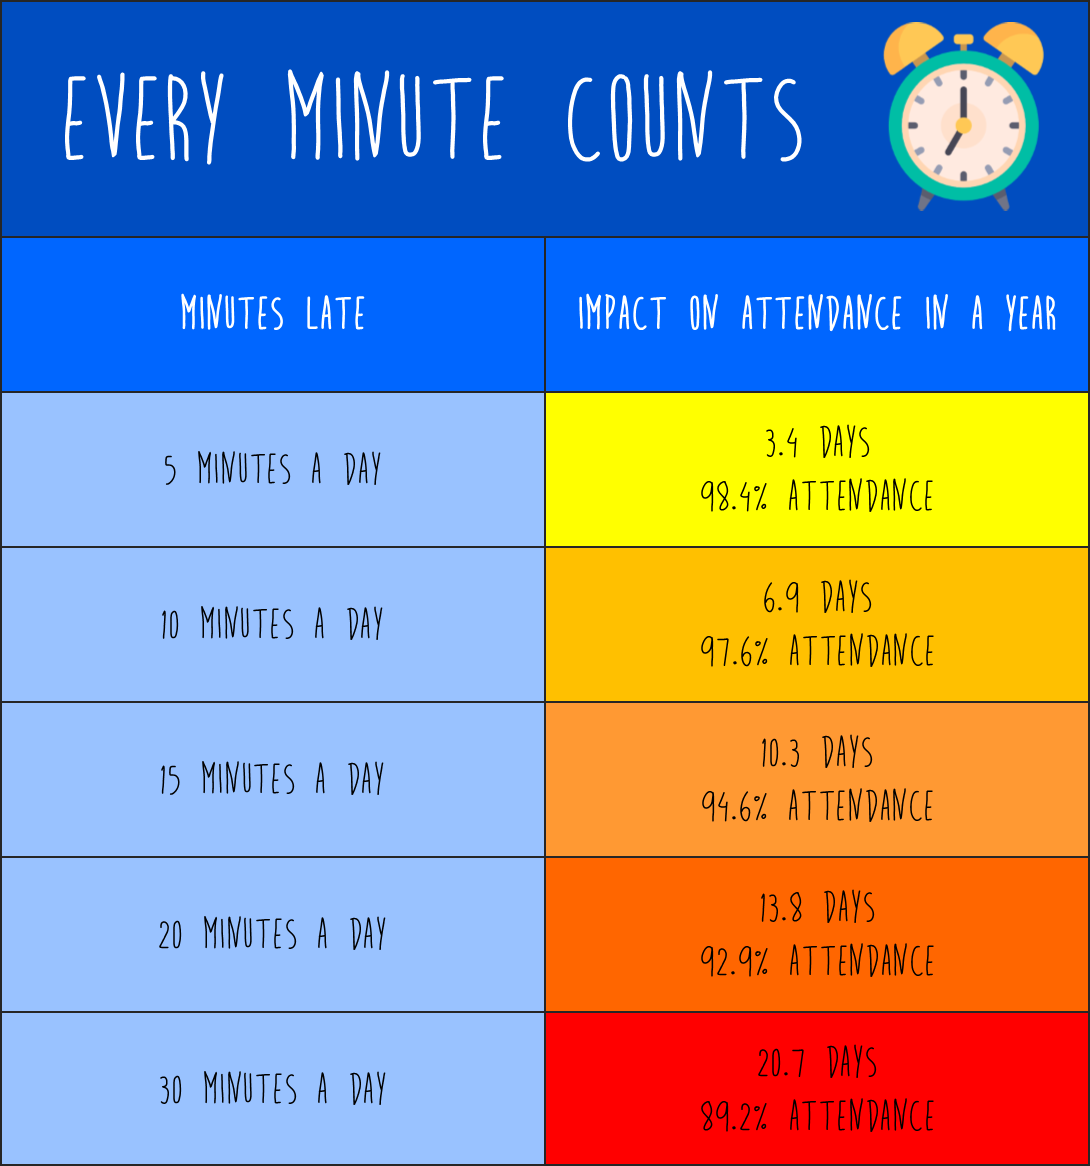 Every minute counts